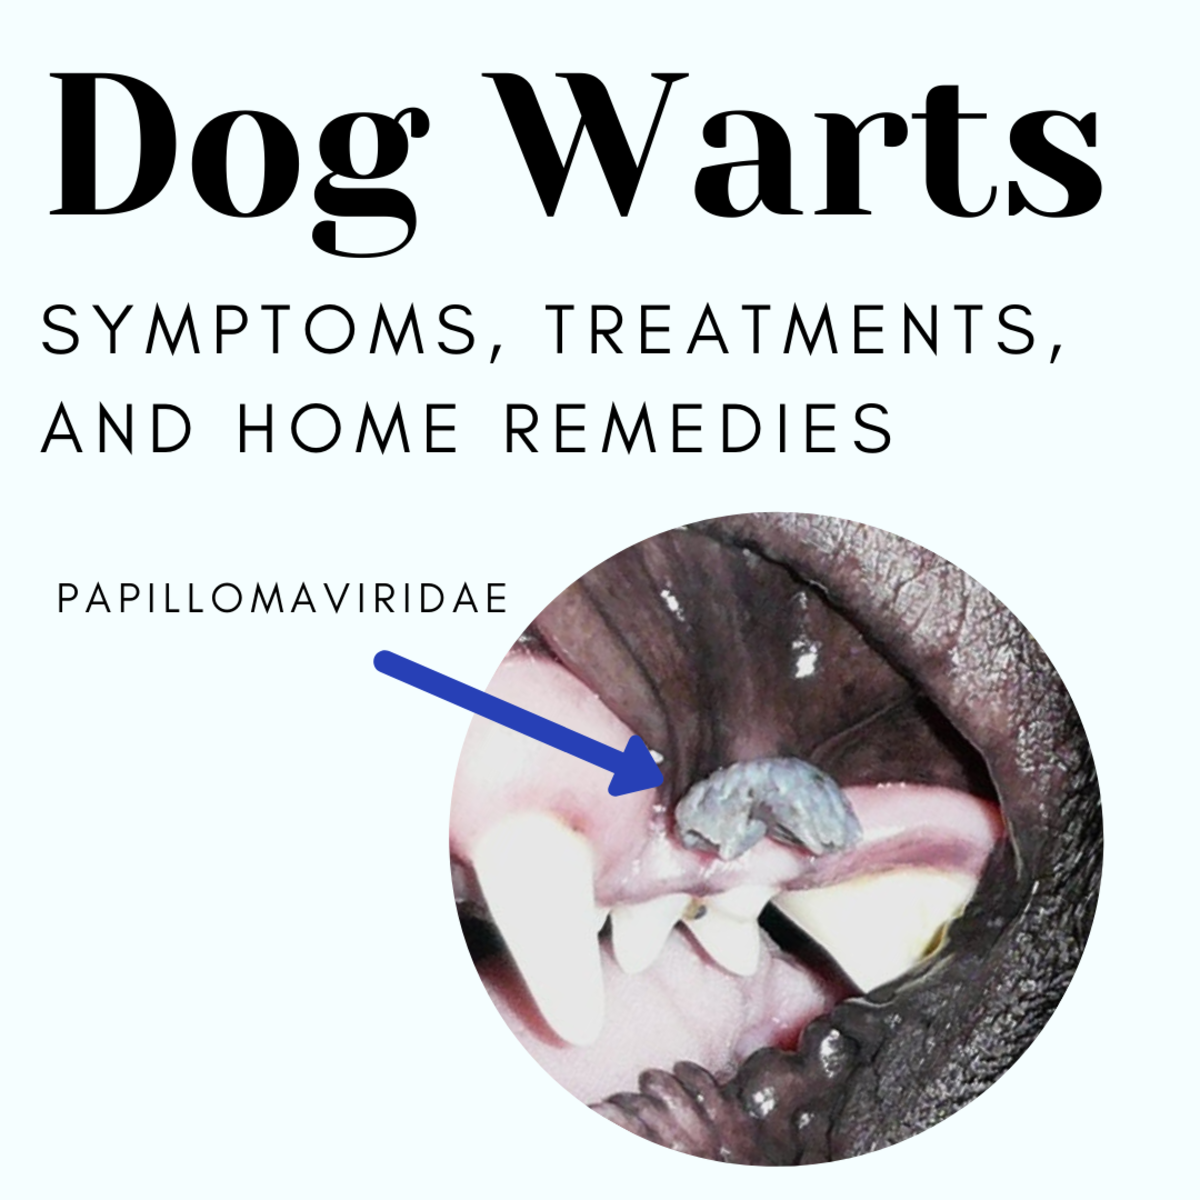 Dogs can also get warts and need help getting rid of them.